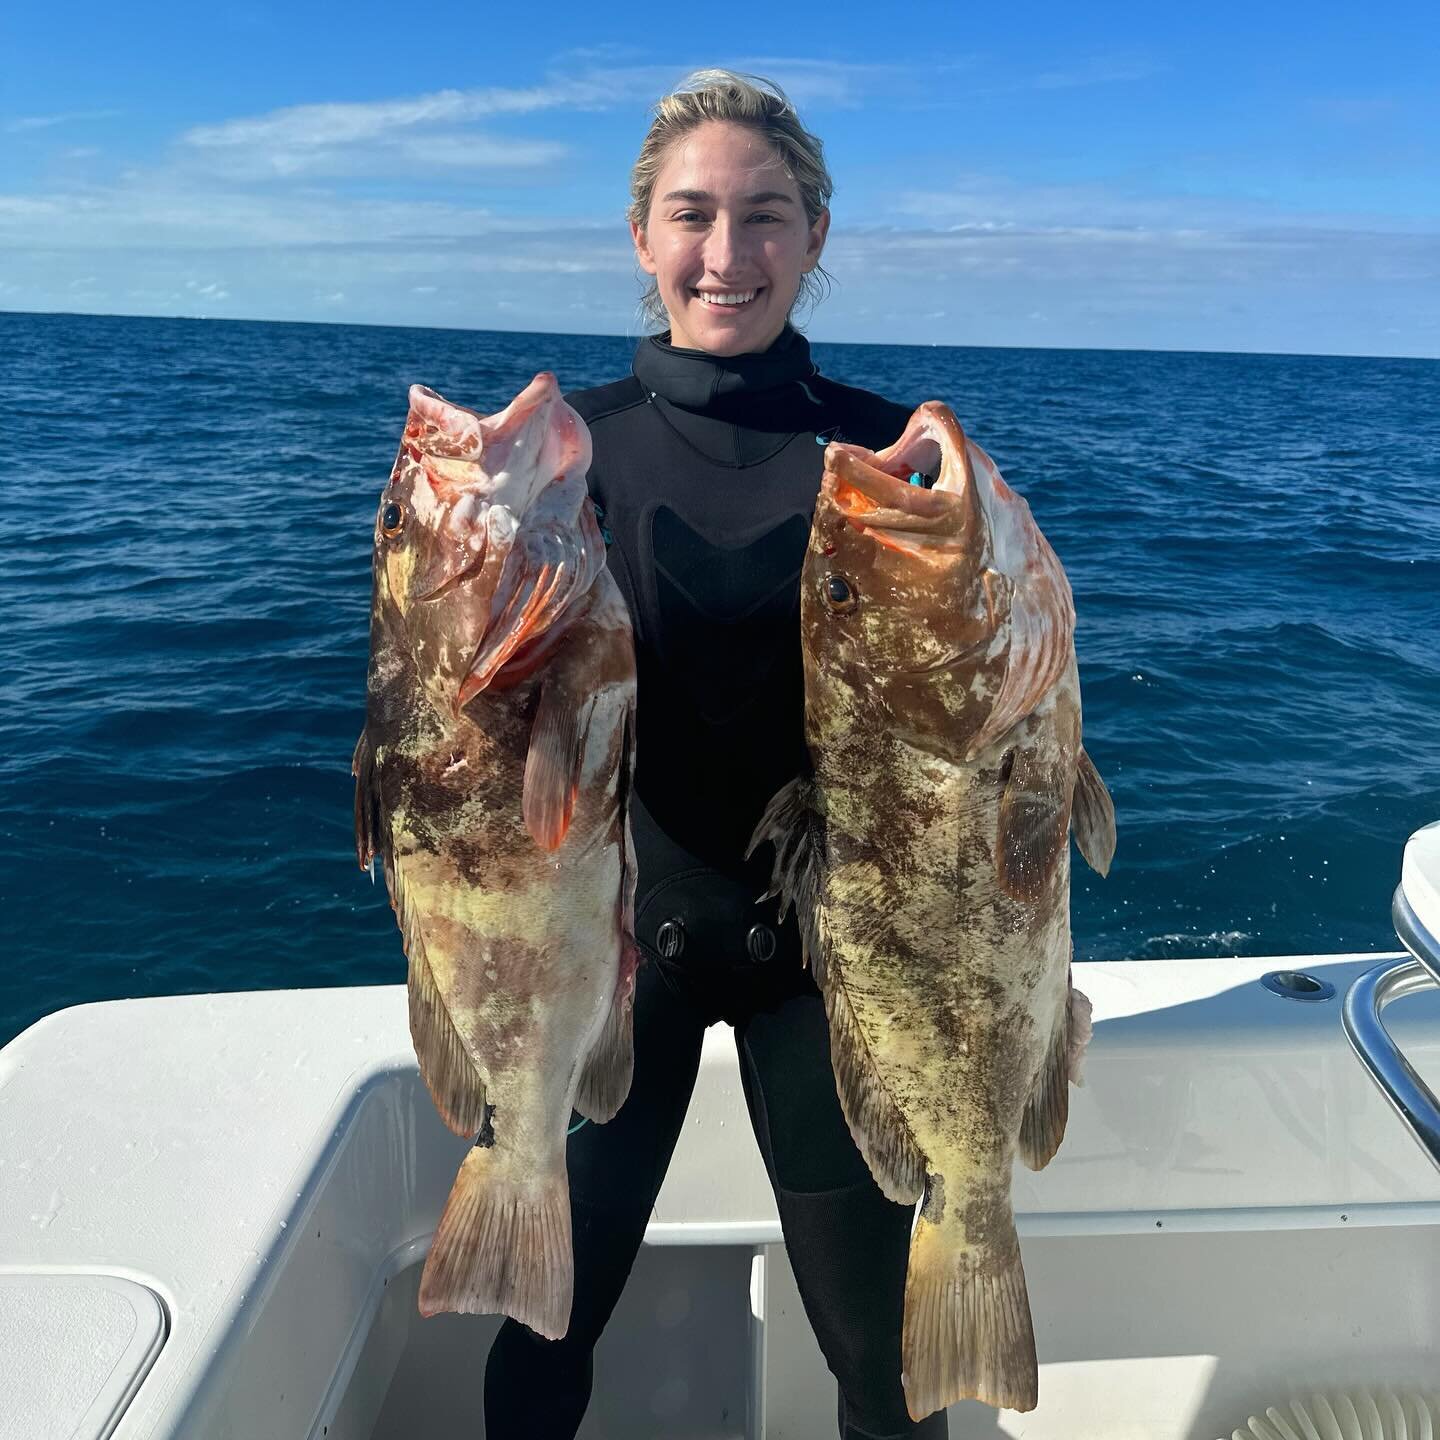 Nassau Queen or Snack Queen.
These were the nicknames I was given on the trip. And I&rsquo;m perfectly okay with both of them🐟🔫

📷 @goodtime_charliecharters @sierra_spearfishing